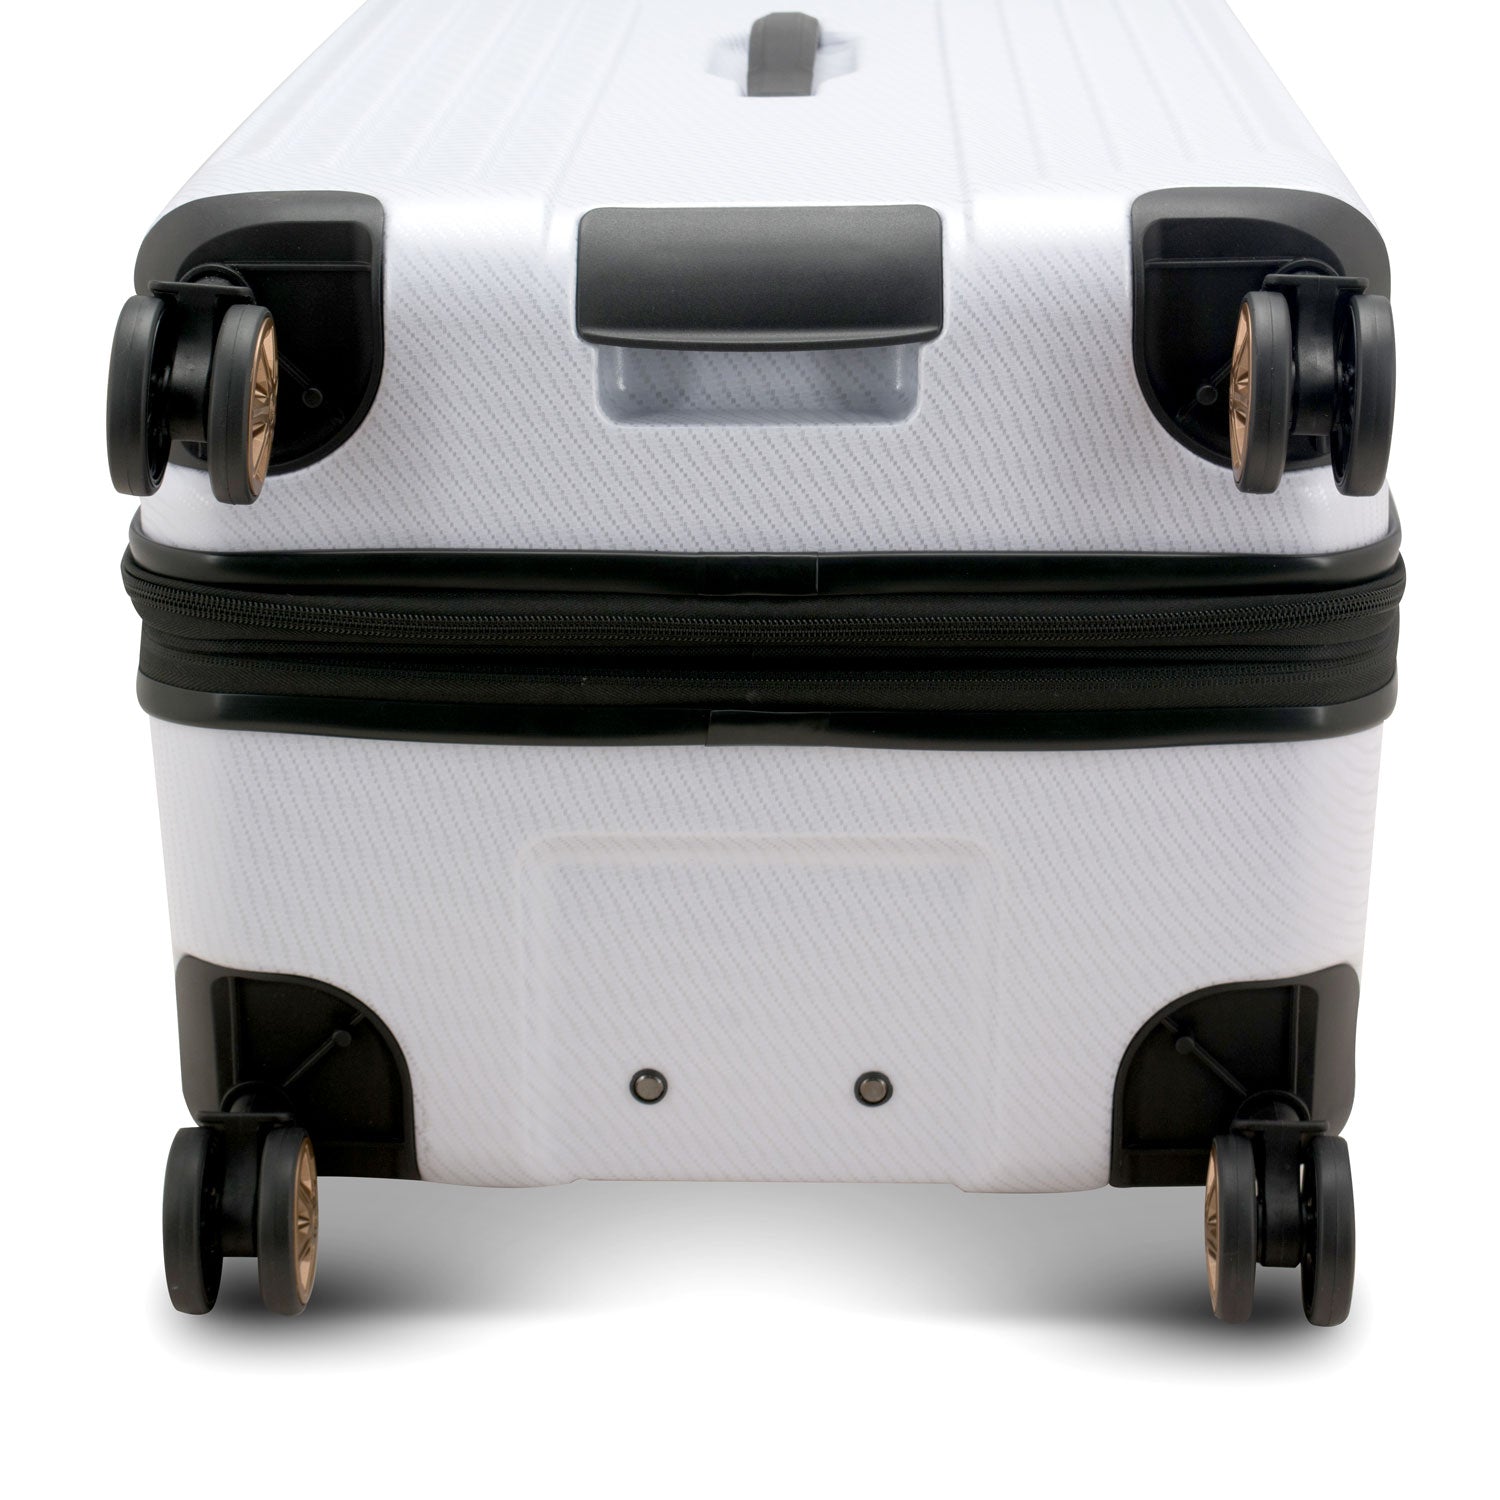 An image of the bottom of the white trunk. It shows the wheels with a bottom handle for easy gripping off the carousel.